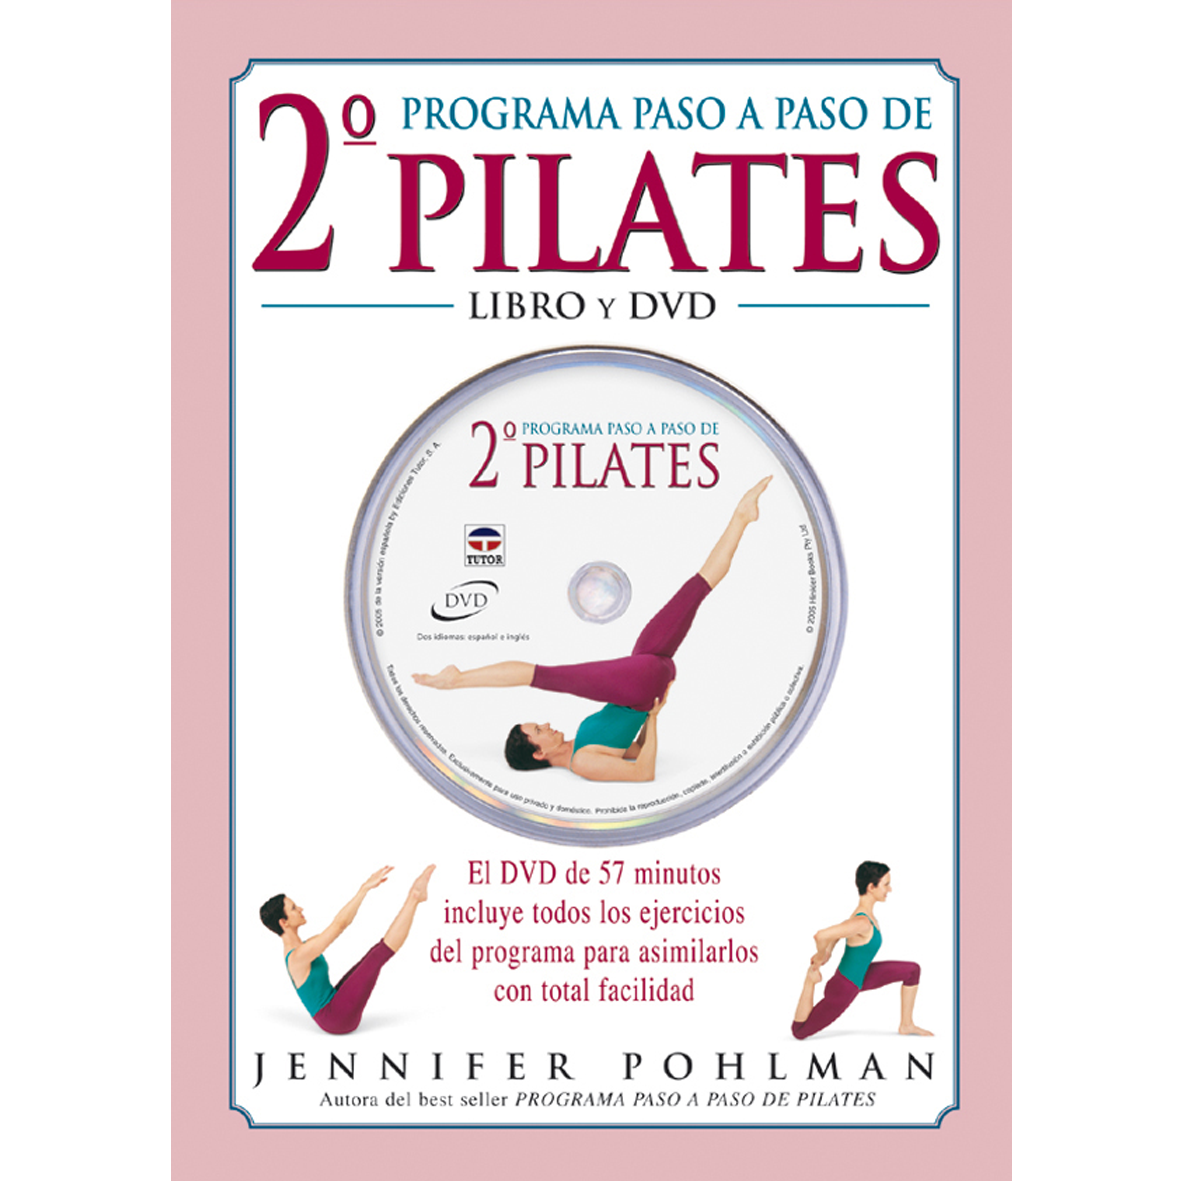 2ND PILATES STEP-BY-STEP PROGRAMME (BOOK + DVD) - (SPANISH).